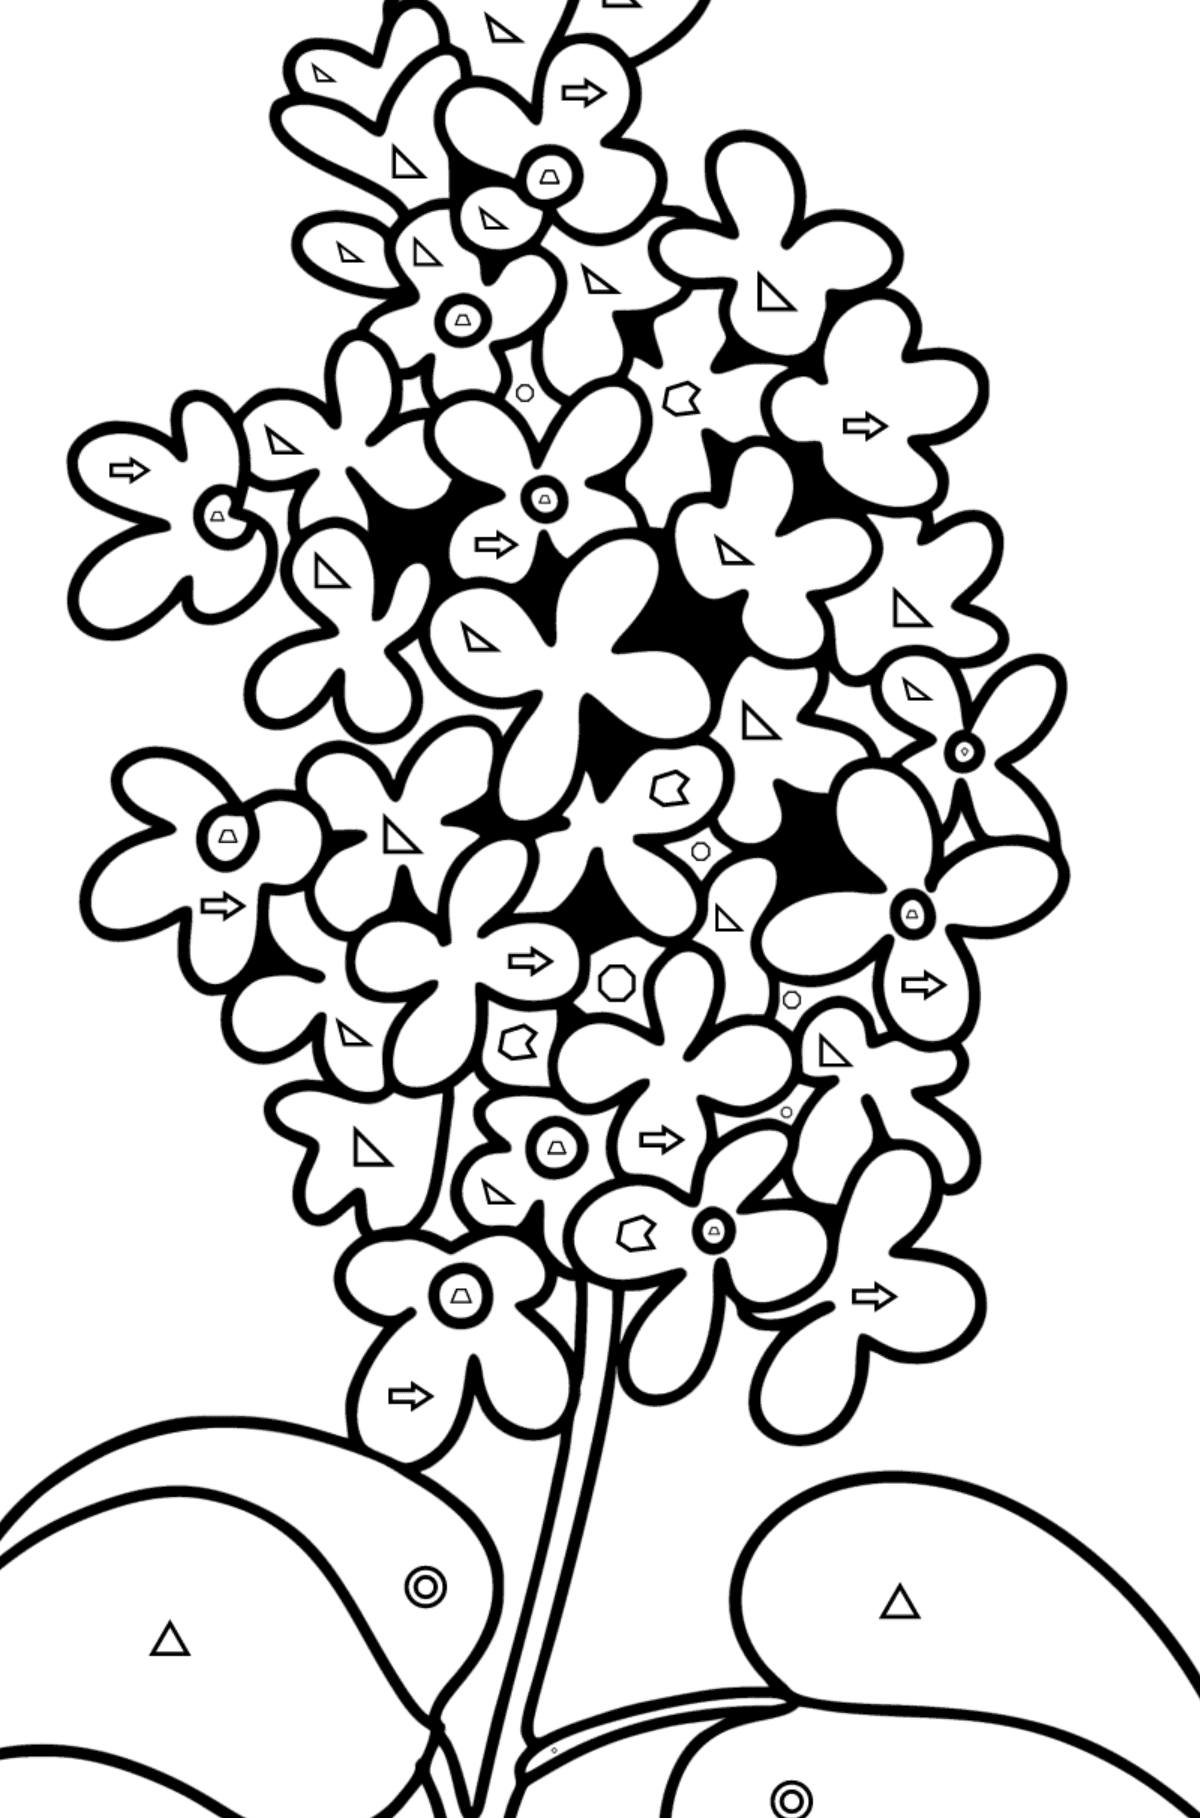 Lilac sprig coloring page - Coloring by Geometric Shapes for Kids